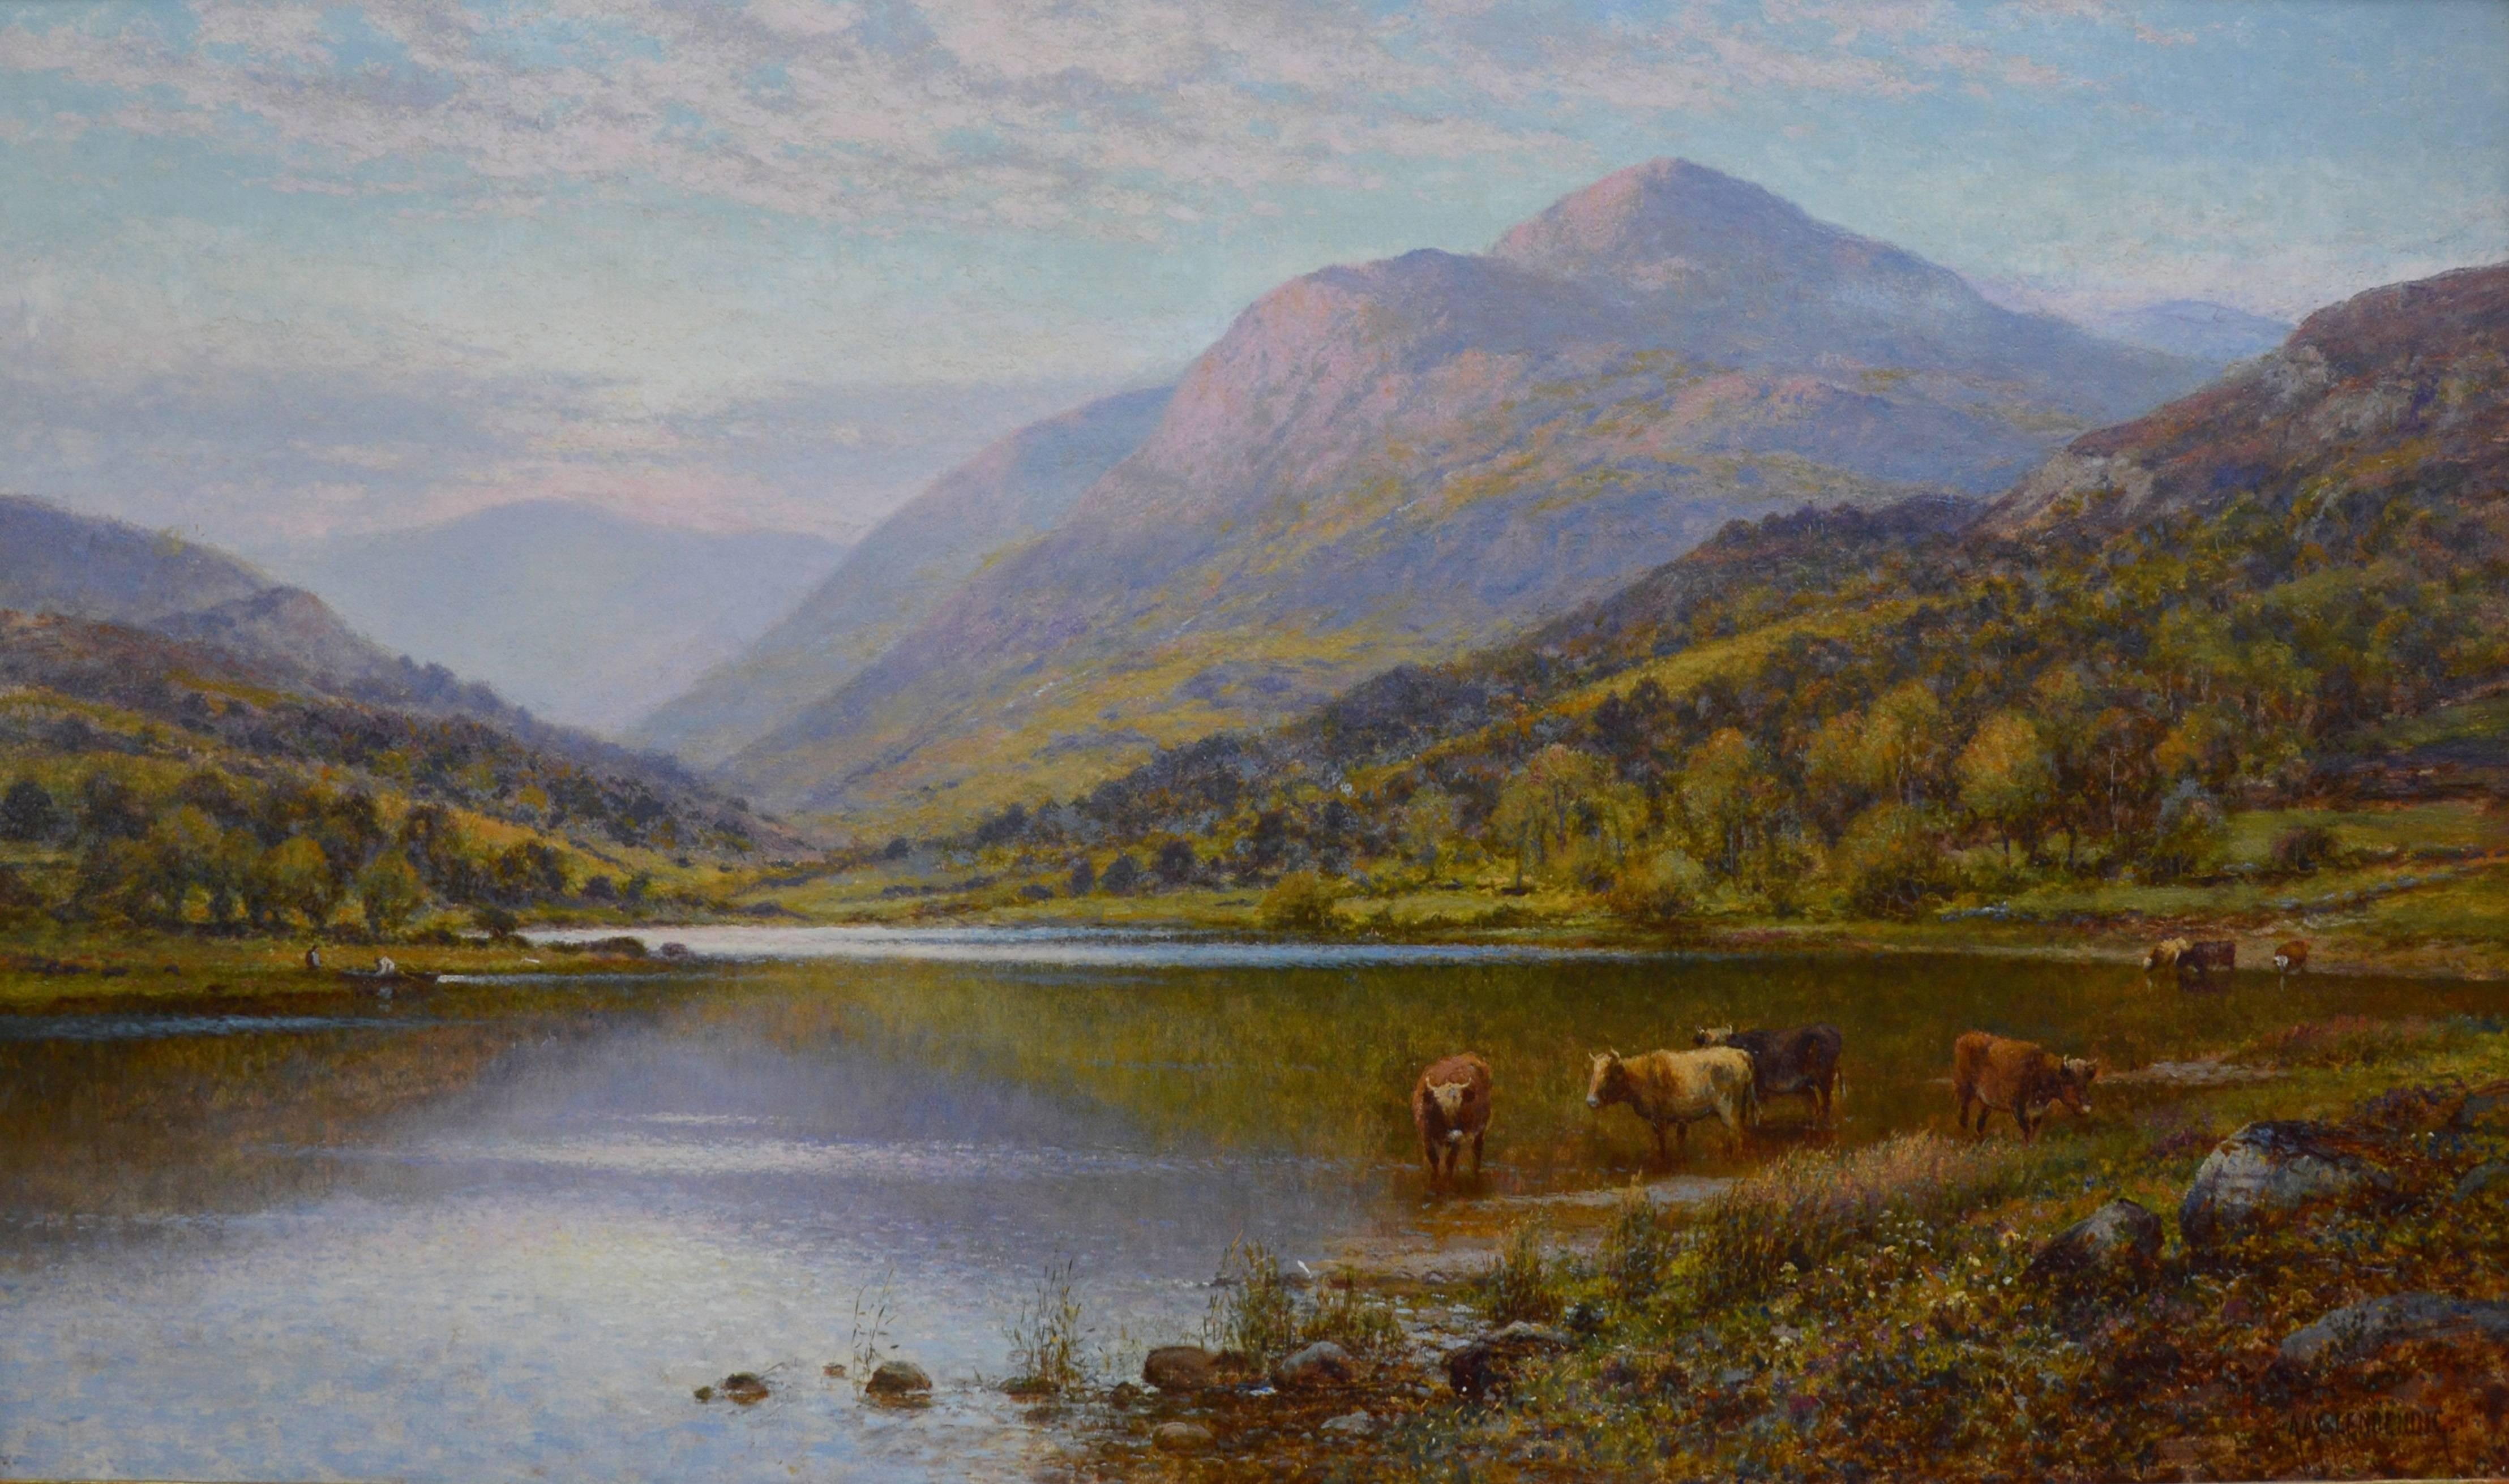 This is a fine 19th century oil on canvas depicting a spectacular Scottish Highland landscape with cattle watering at the shoreline of a loch in summertime by the famous Victorian artist Alfred Augustus Glendening Snr. (1840-1910). The painting is